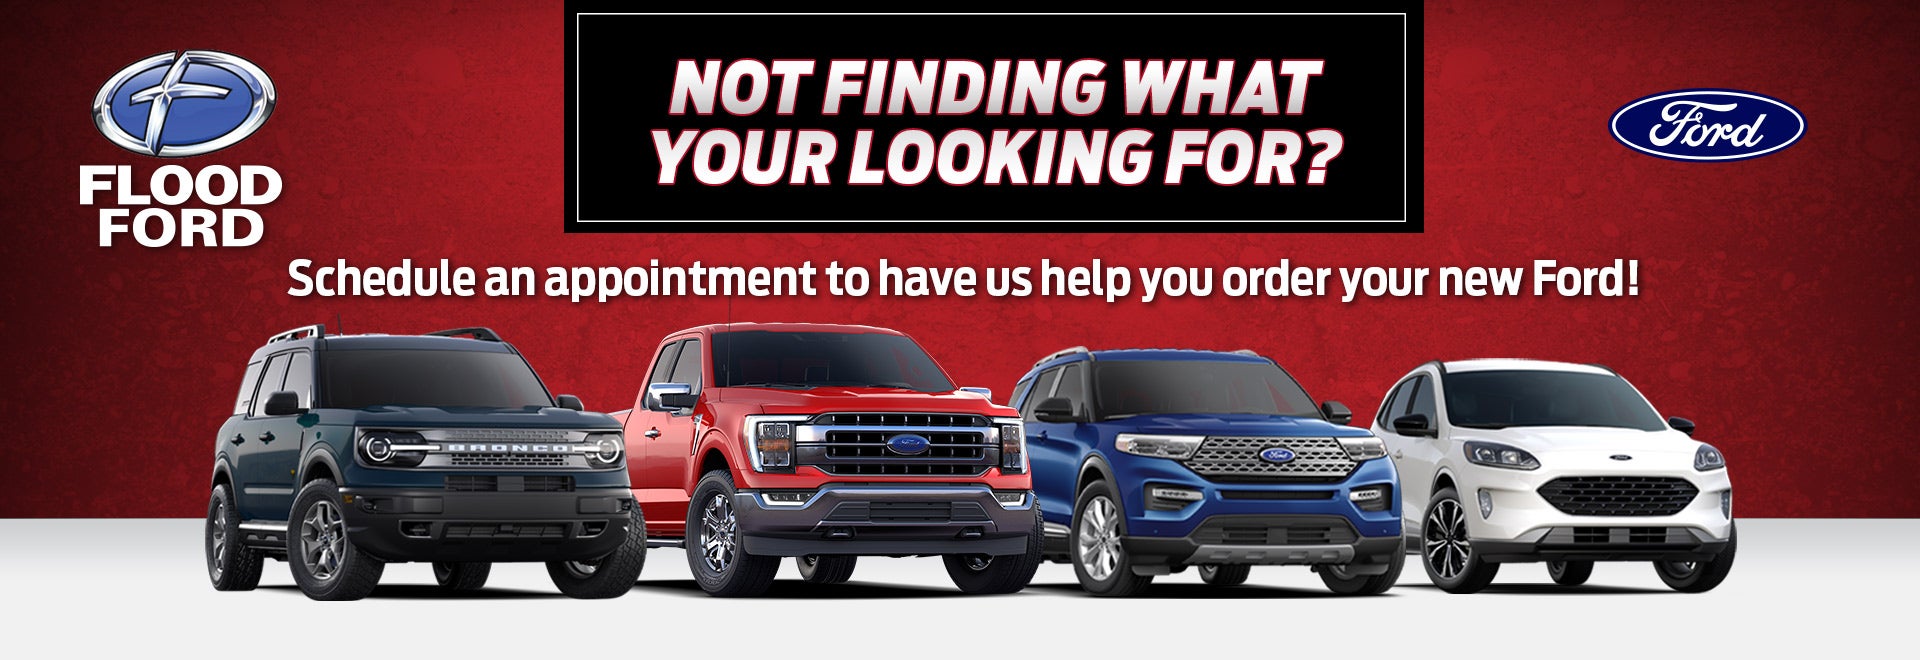 Find Your Next Car